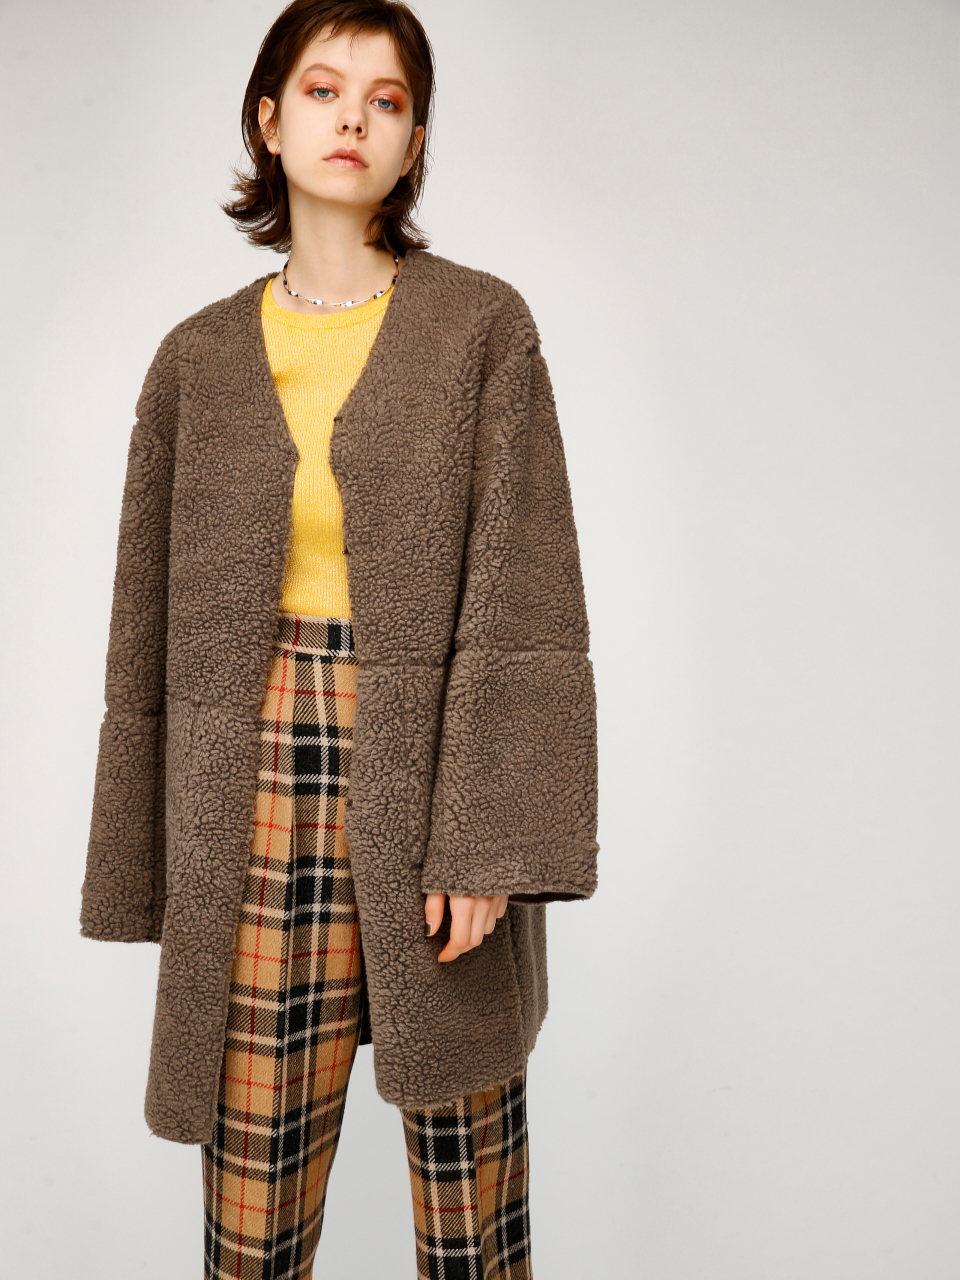 MOUSSY 11/9(THU) New Arrivals | MOUSSY